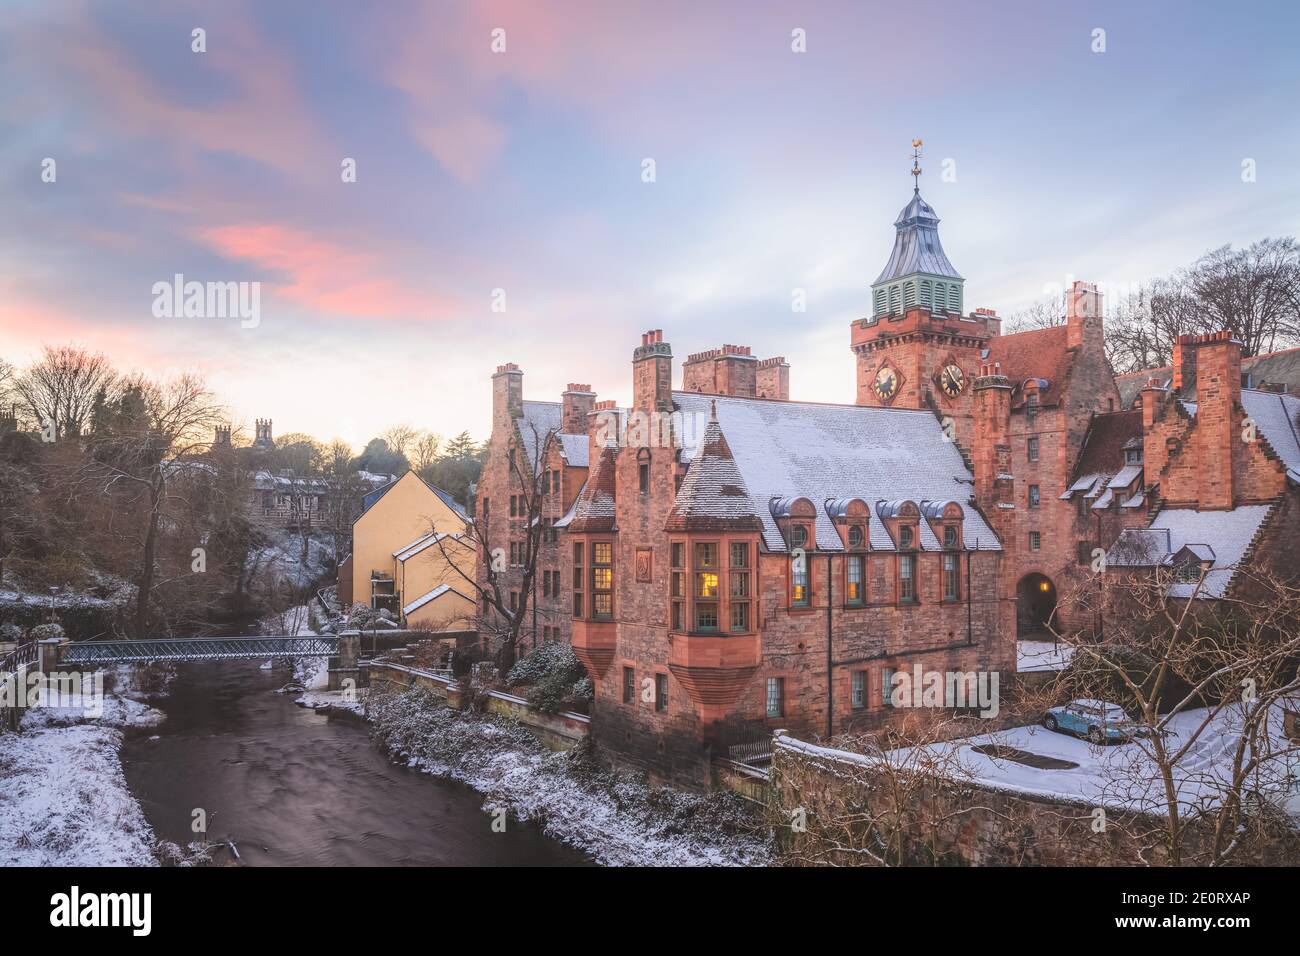 A beautiful afternoon at the historic Dean Village in Edinburgh, Scotland after a fresh winter snowfall. Stock Photo